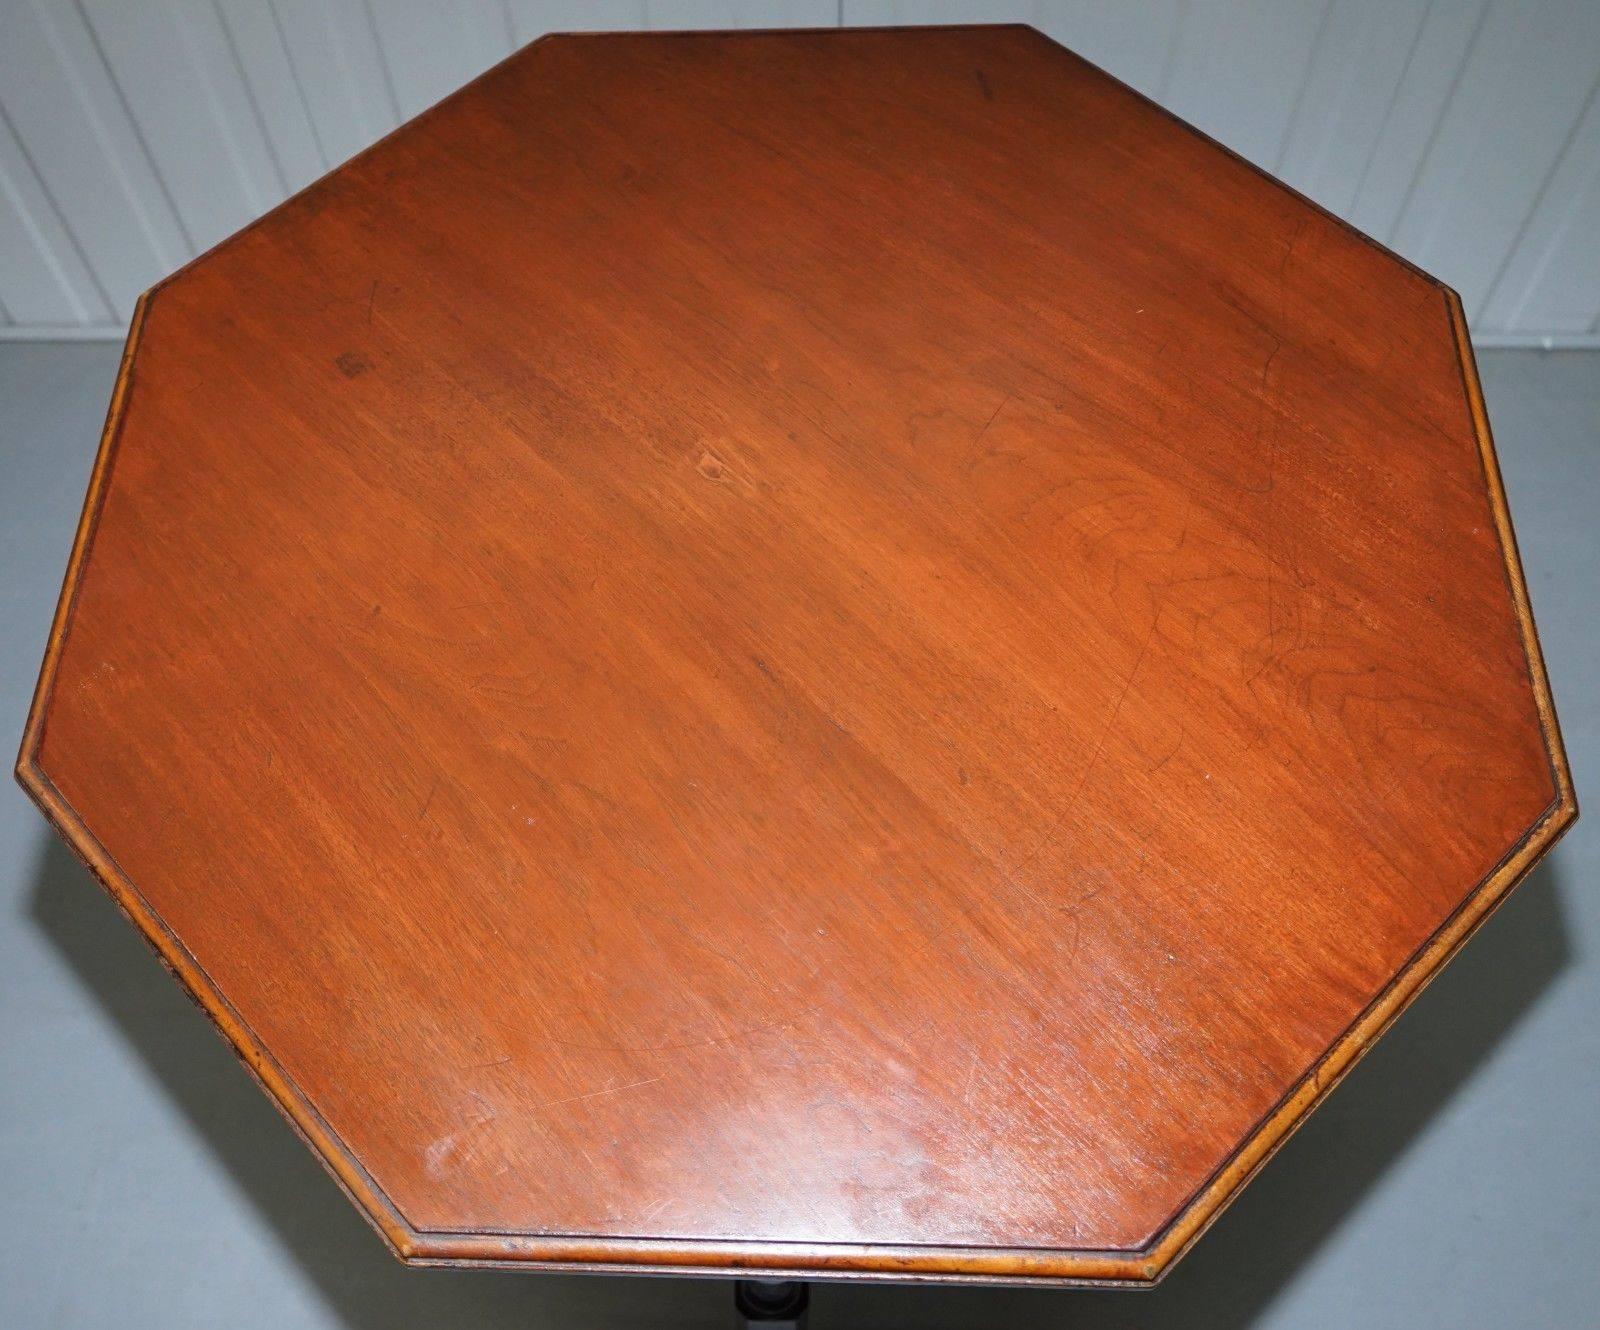 We are delighted to offer for sale this stunning antique fretwork carved mahogany side table with the original paper label from Mousell Bros LTD removal contractors Leamington spa

The table is a very good looking well made and functional piece,